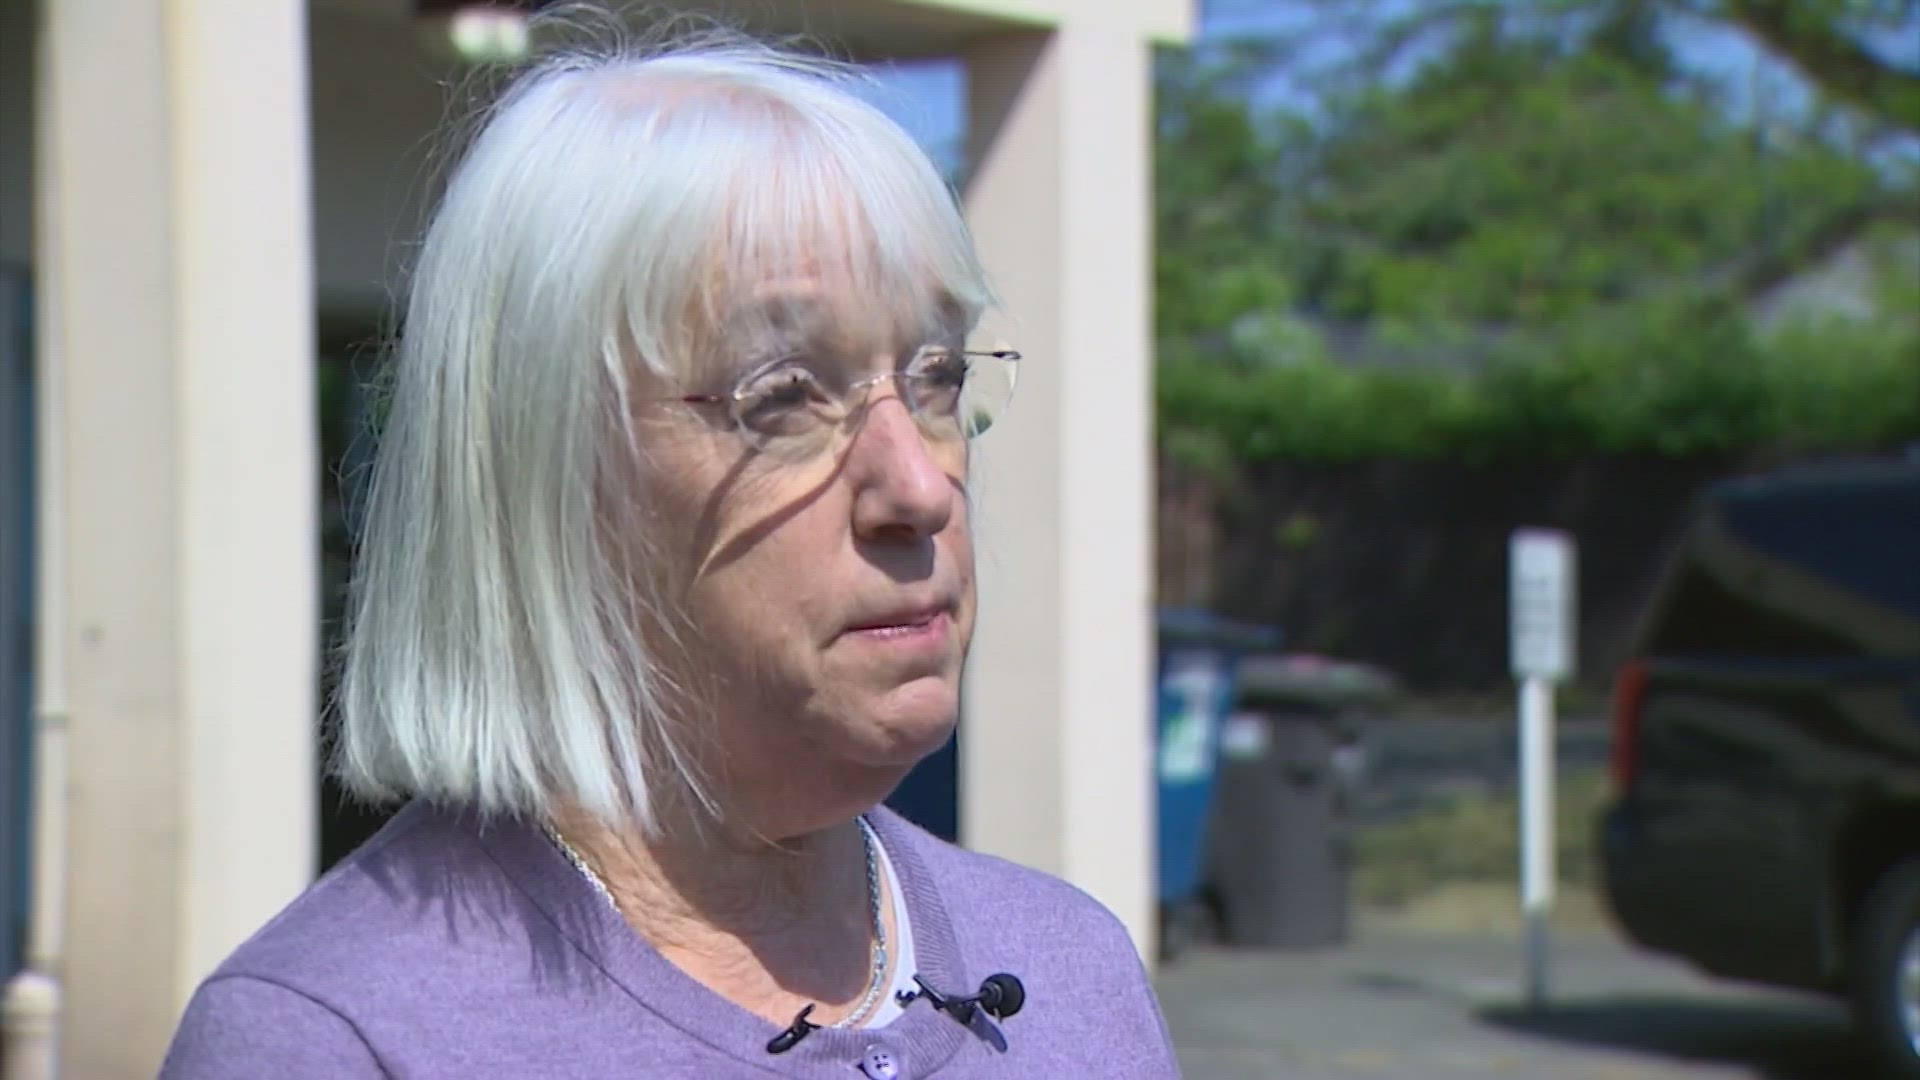 Patty Murray said she is working to secure $3 million to go toward drainage work and flooding prevention in Seattle's South Park neighborhood.